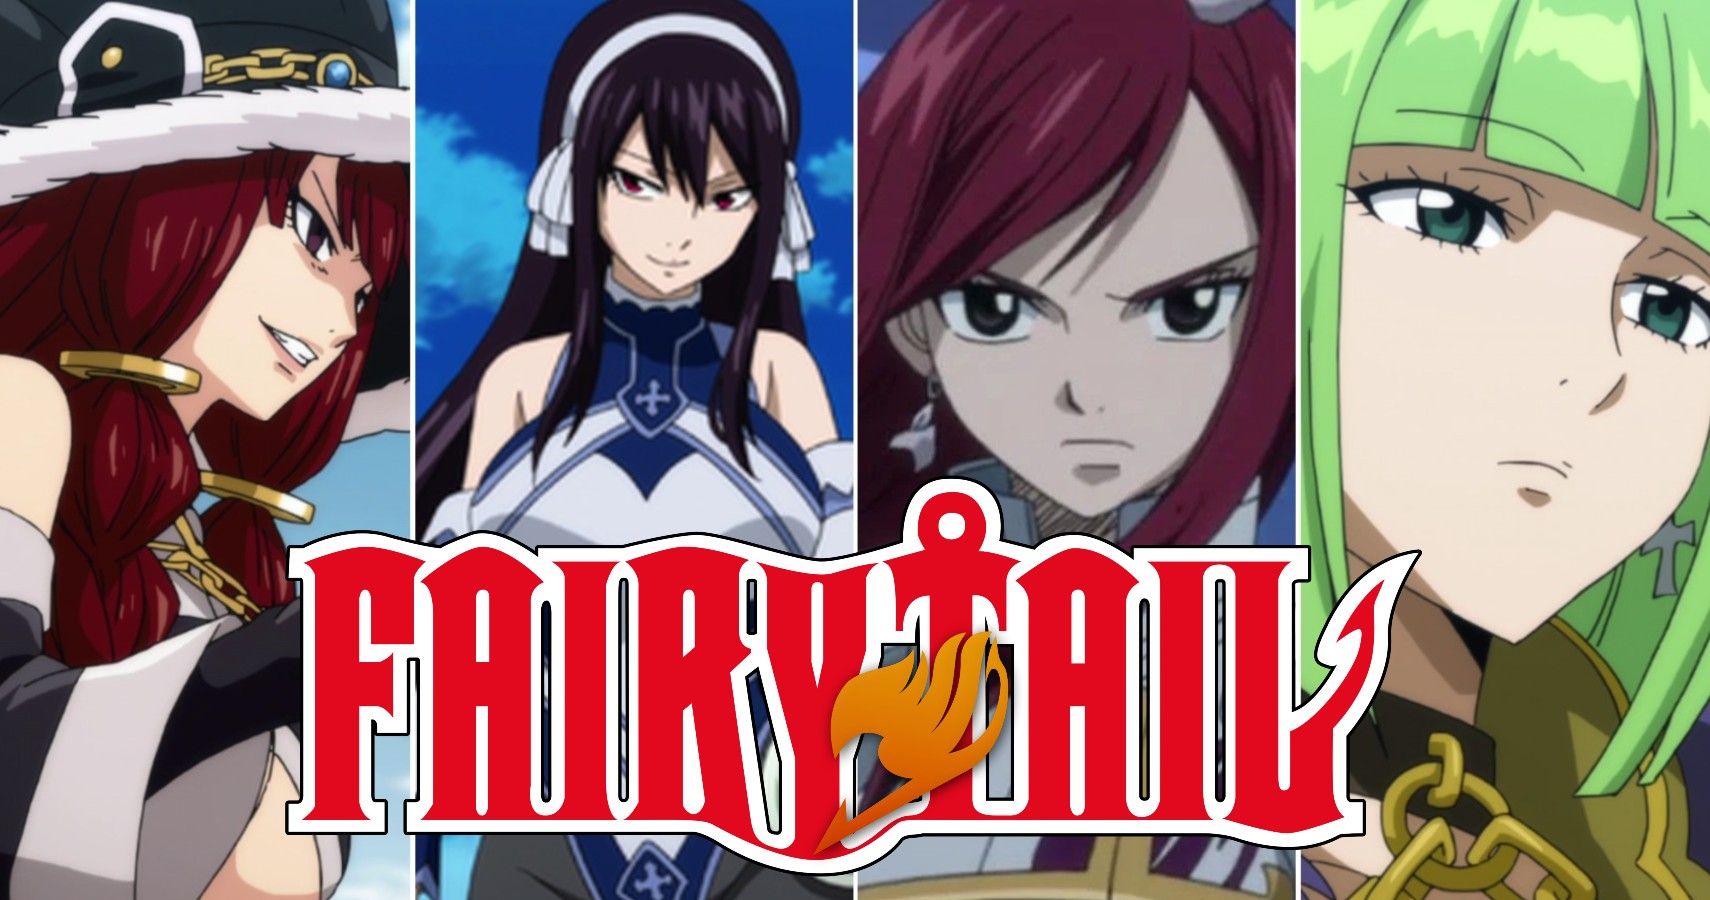 10 Best Fairy Tail Openings, Ranked